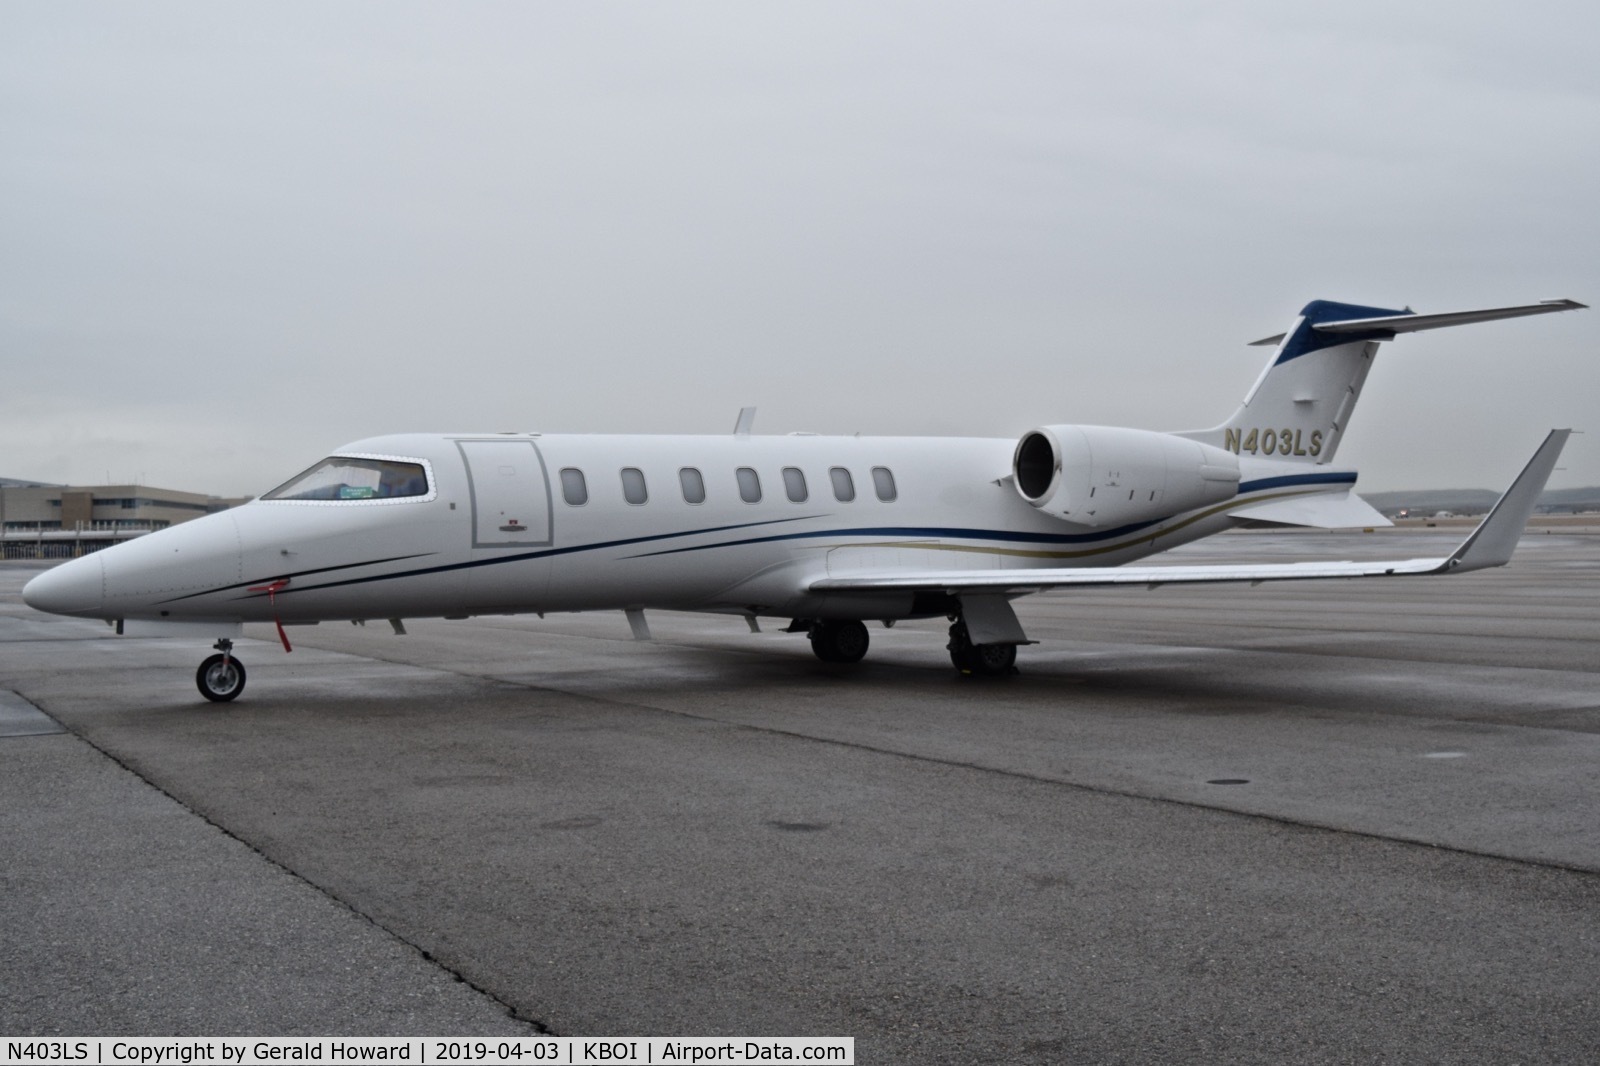 N403LS, 2009 Learjet Inc 45 C/N 2124, Parked on the north GA ramp.